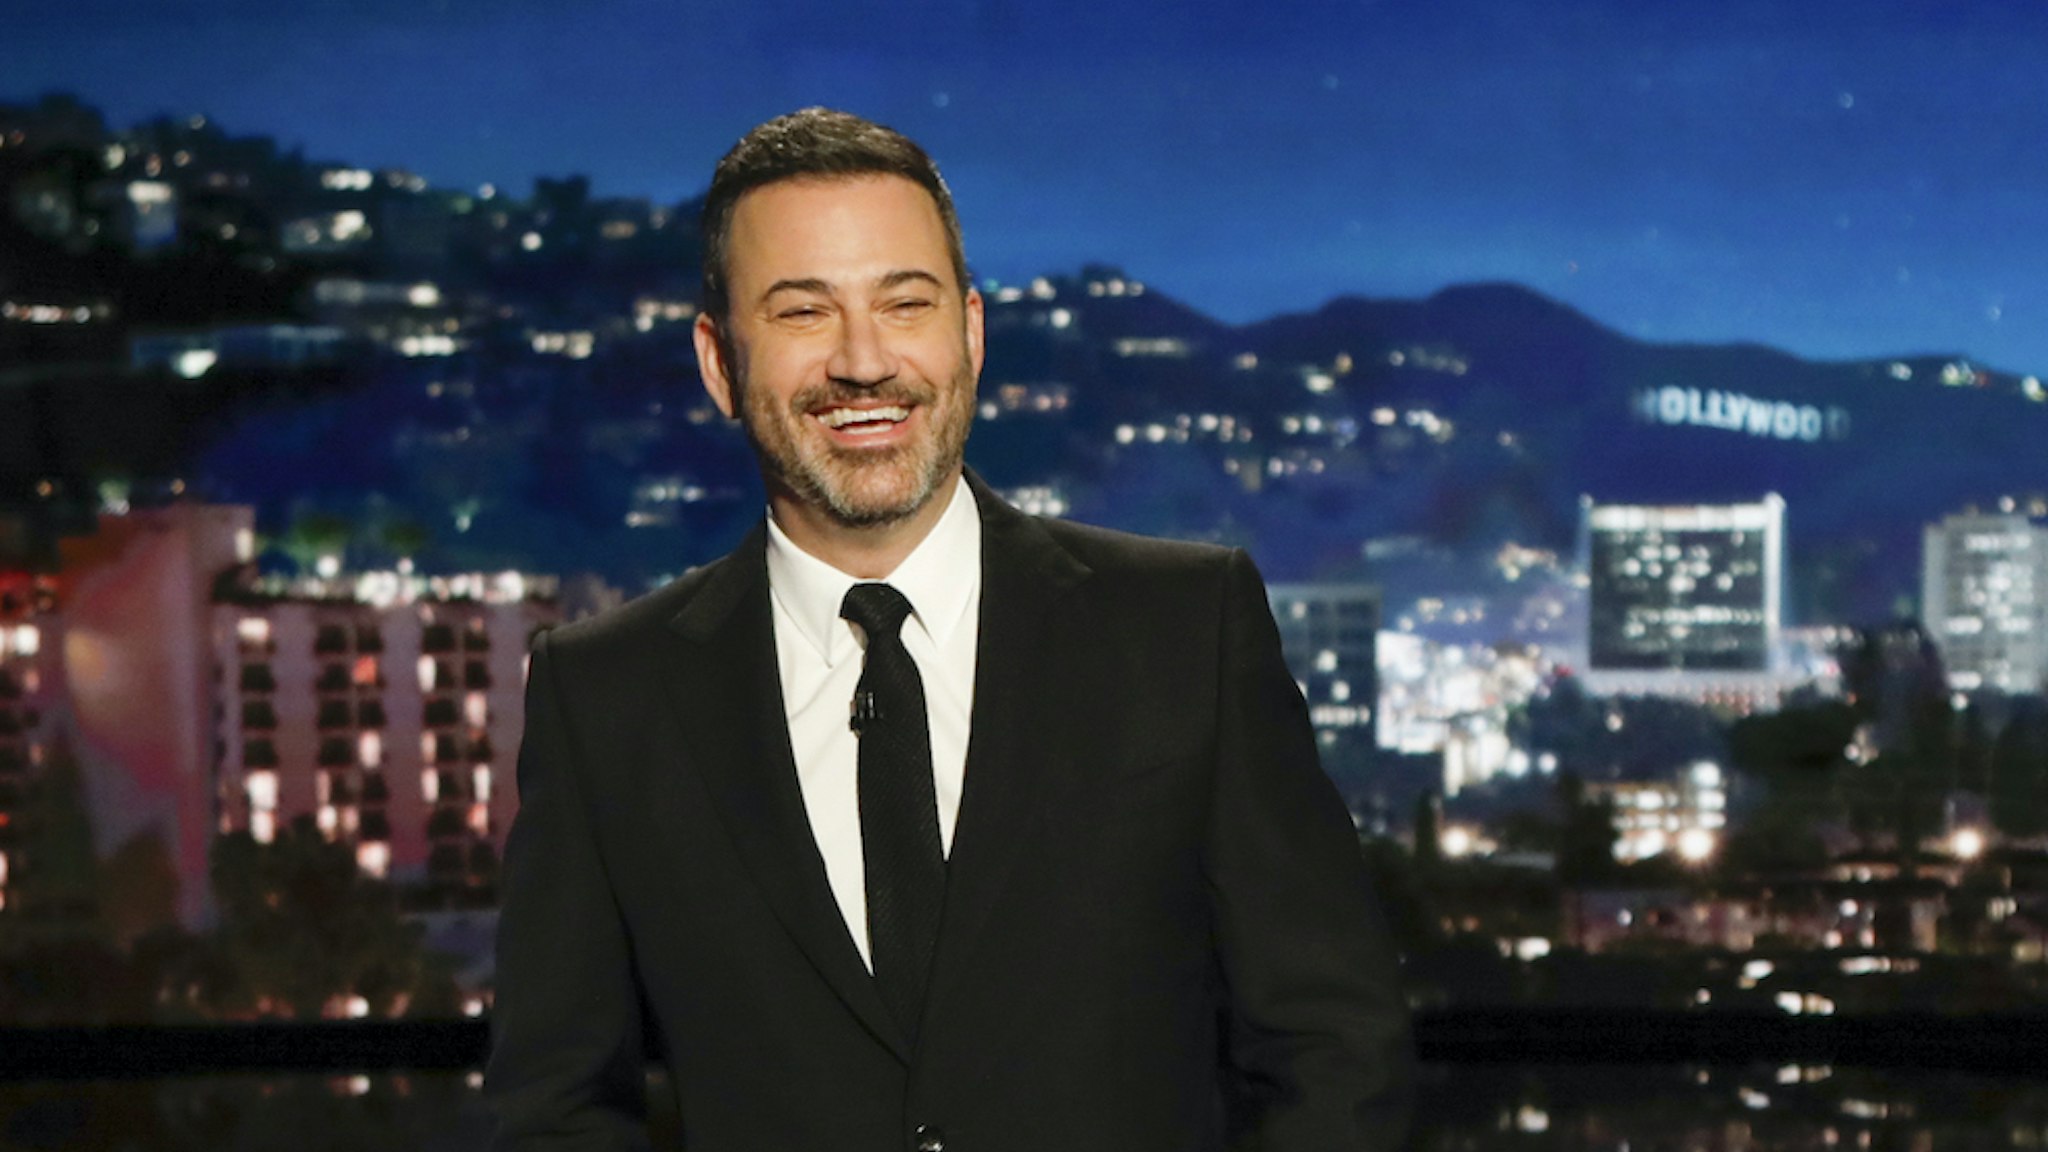 "Jimmy Kimmel Live!" airs every weeknight at 11:35 p.m. EST and features a diverse lineup of guests that include celebrities, athletes, musical acts, comedians and human interest subjects, along with comedy bits and a house band. The guests for Tuesday, January 28, included Magic Johnson, Ben Schwartz ("Sonic the Hedgehog"), and musical guest Charlie Wilson. (Randy Holmes via Getty Images)